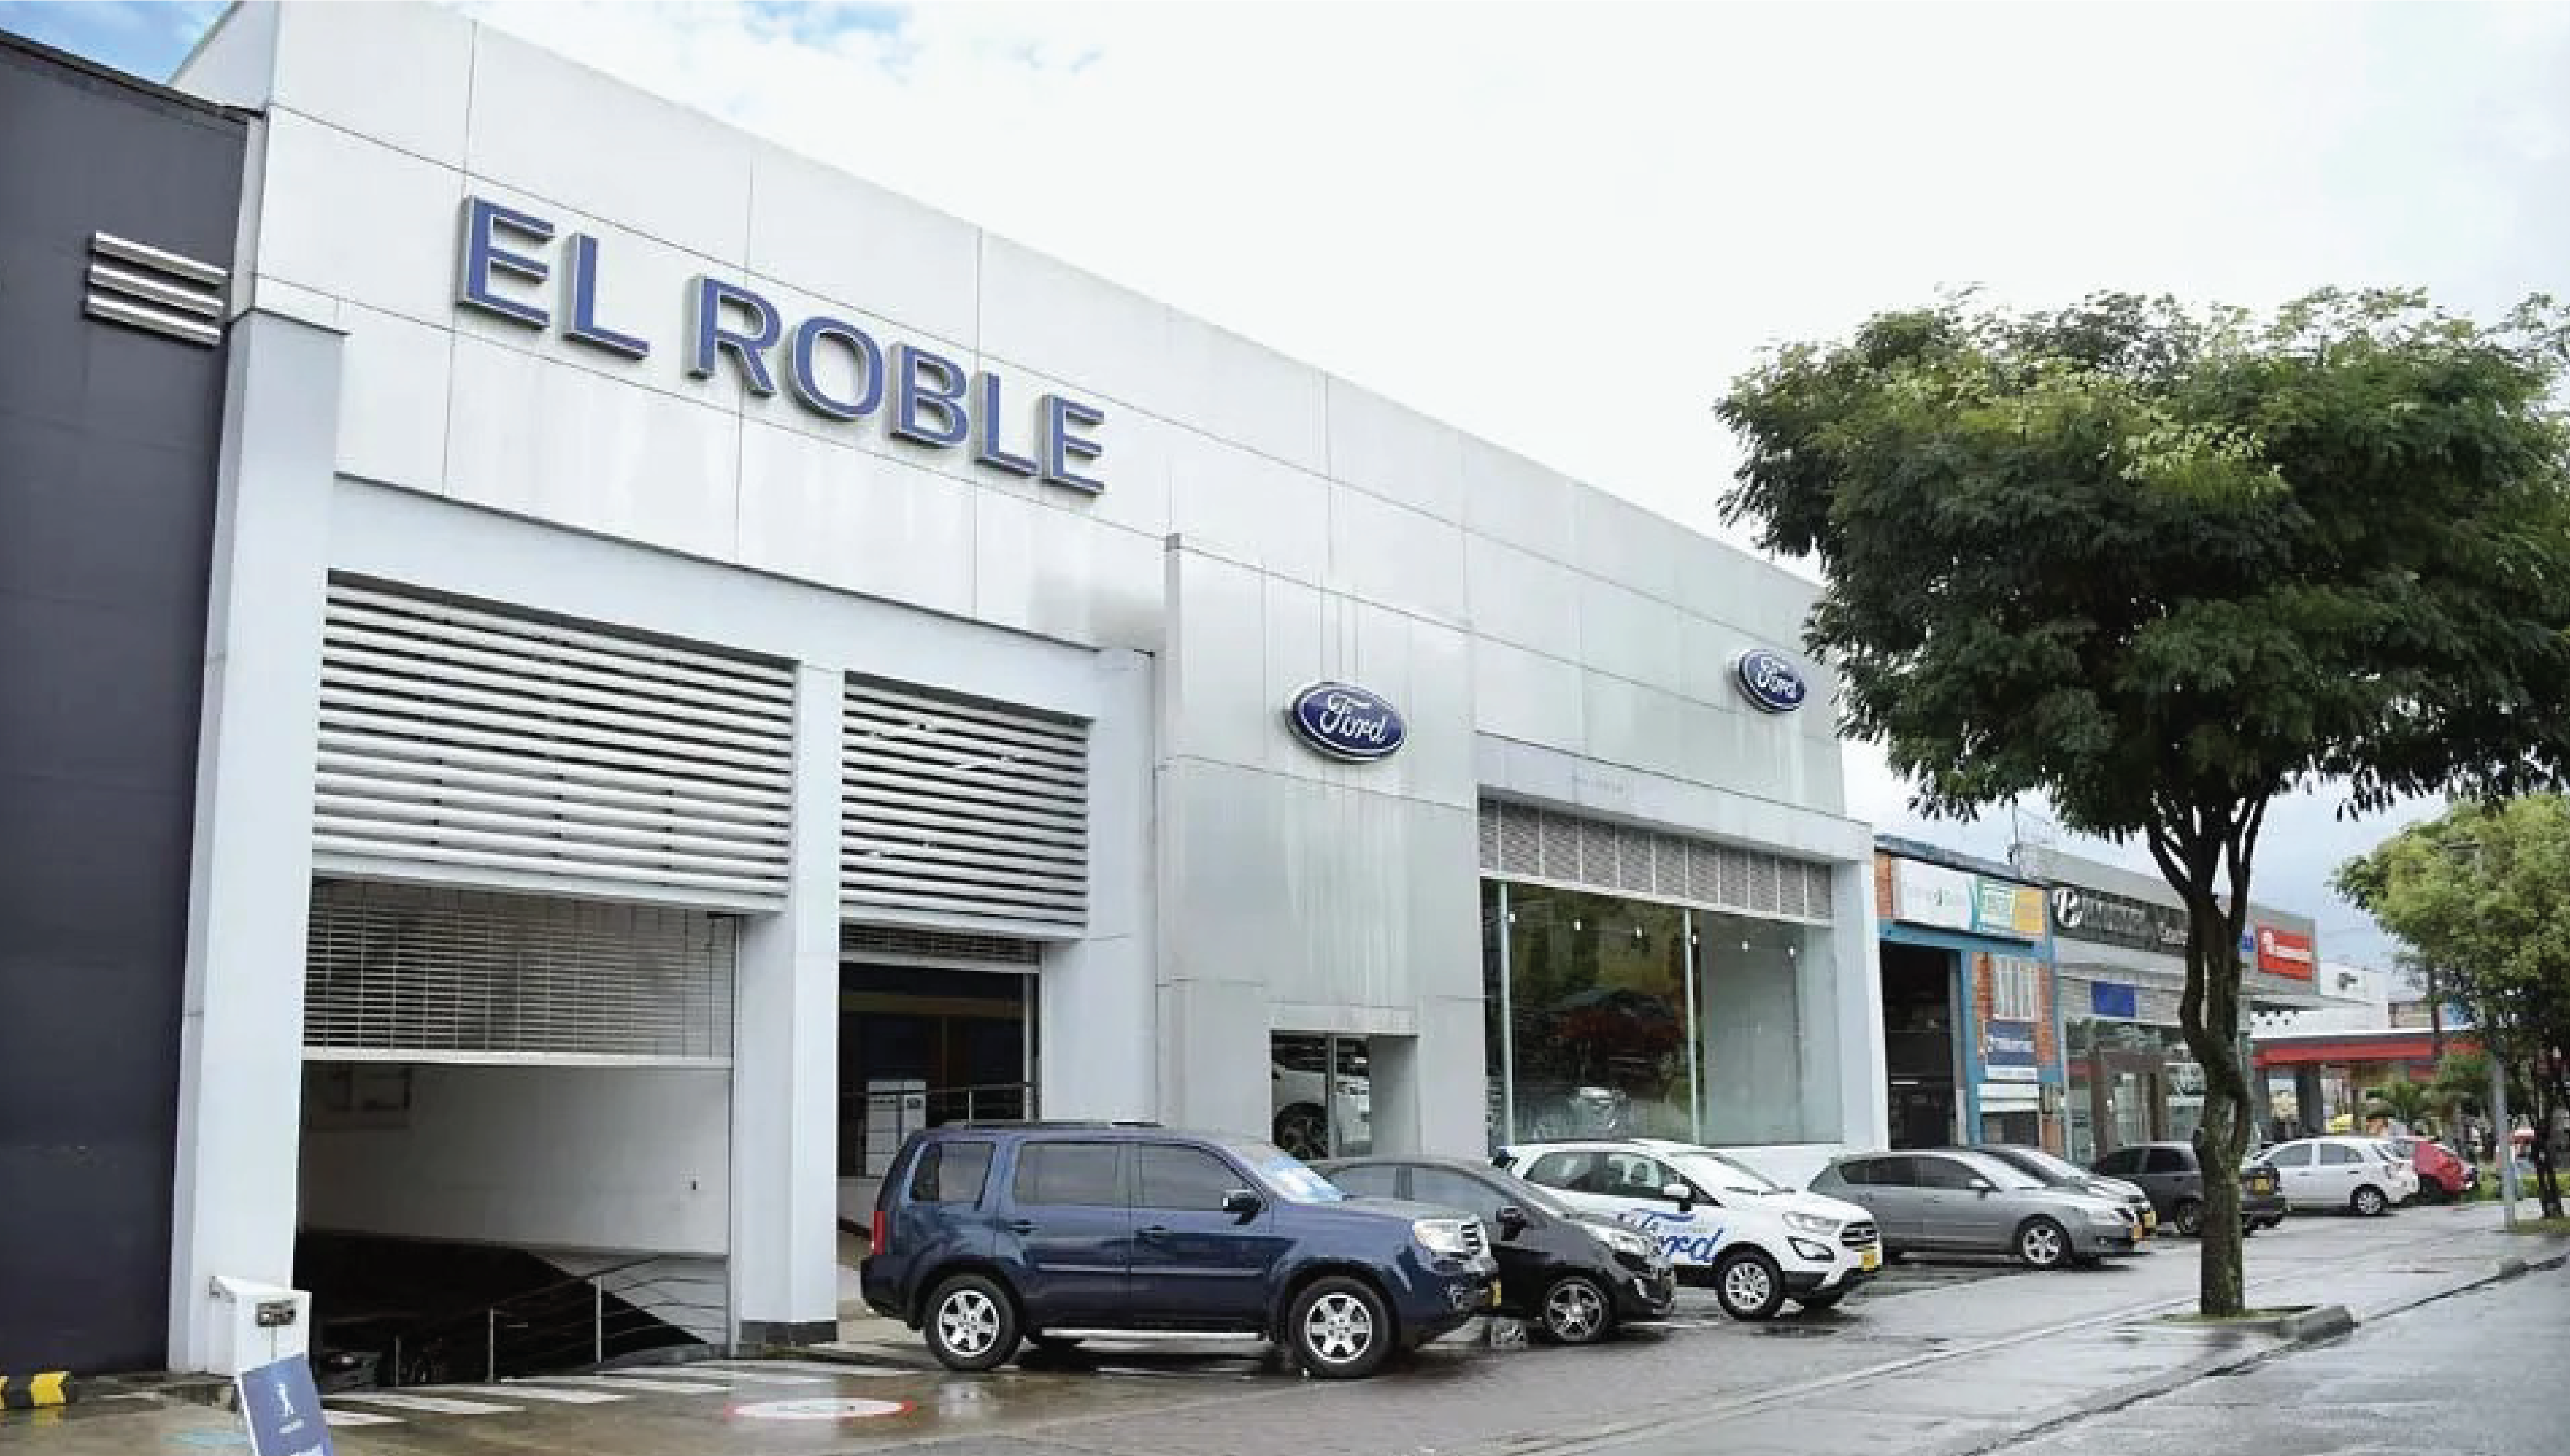 Local El roble motor Ford Pereira Colombia